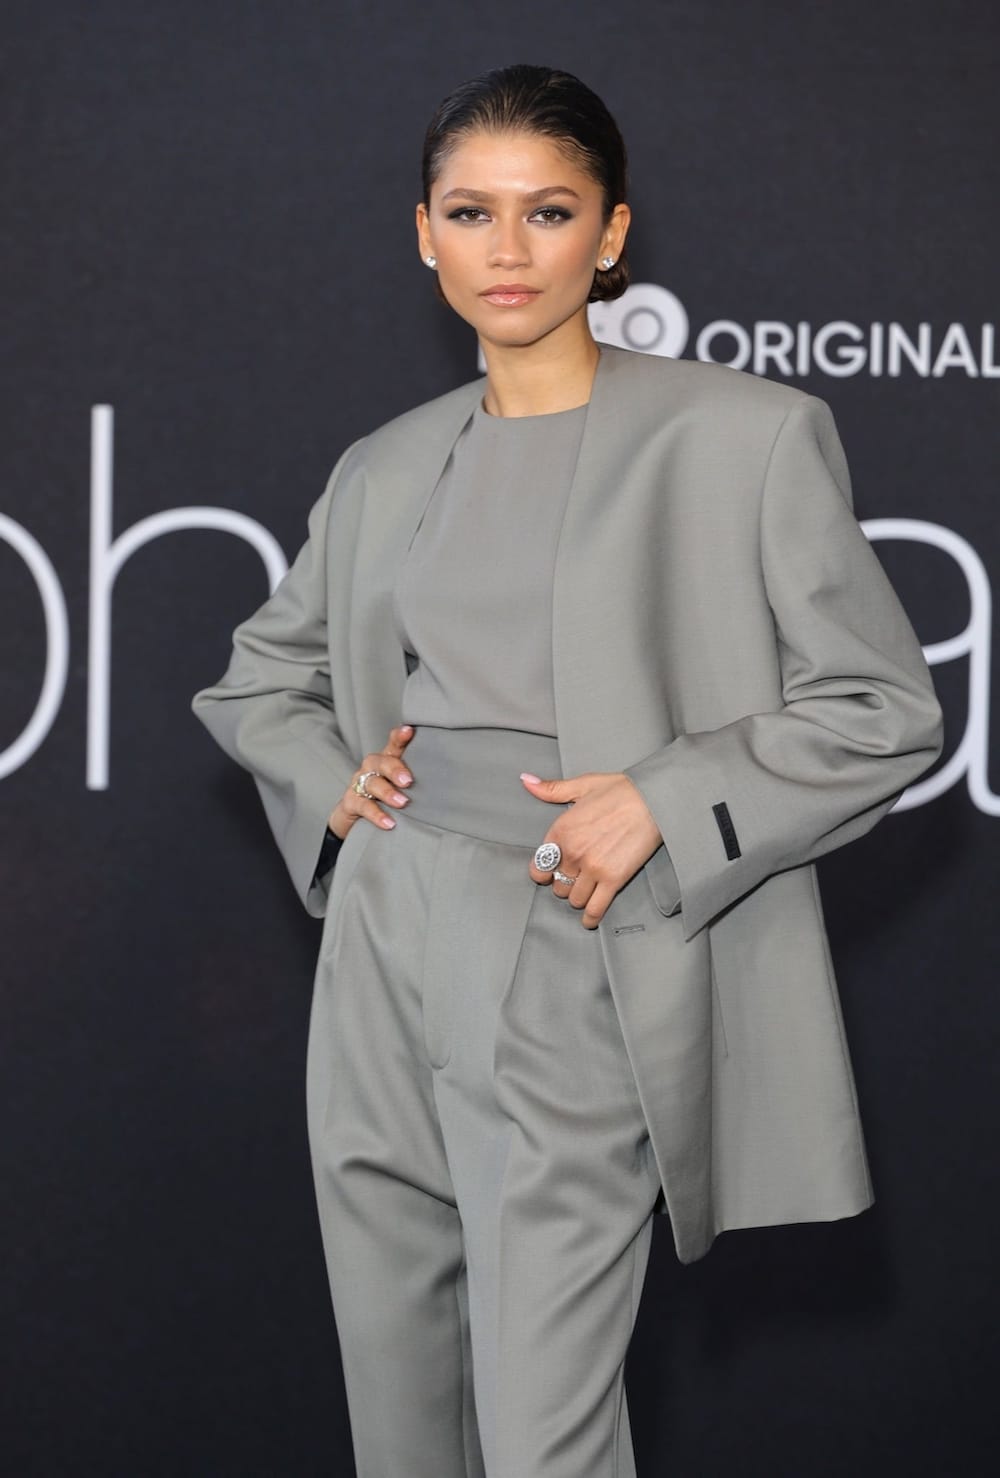 Lovely Zendaya Coleman in Fear of God at HBO Max ‘Euphoria’ FYC 2022